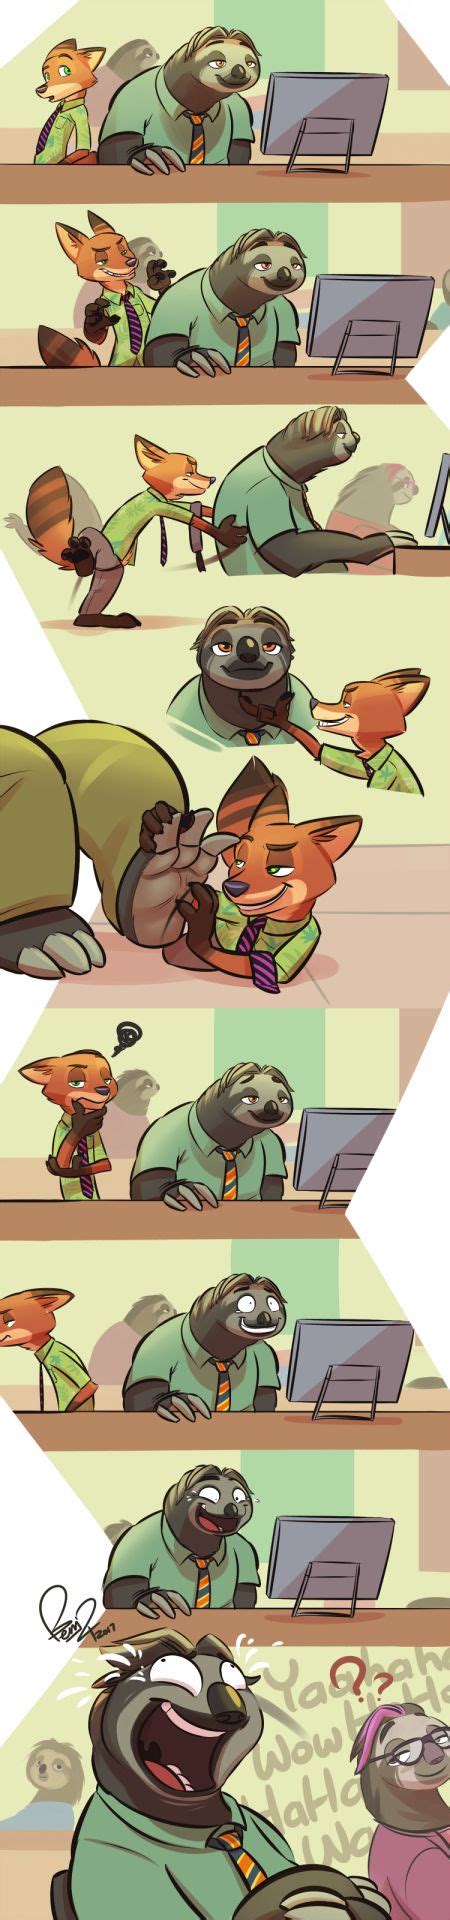 613 Best Images About Zootopia On Pinterest Disney